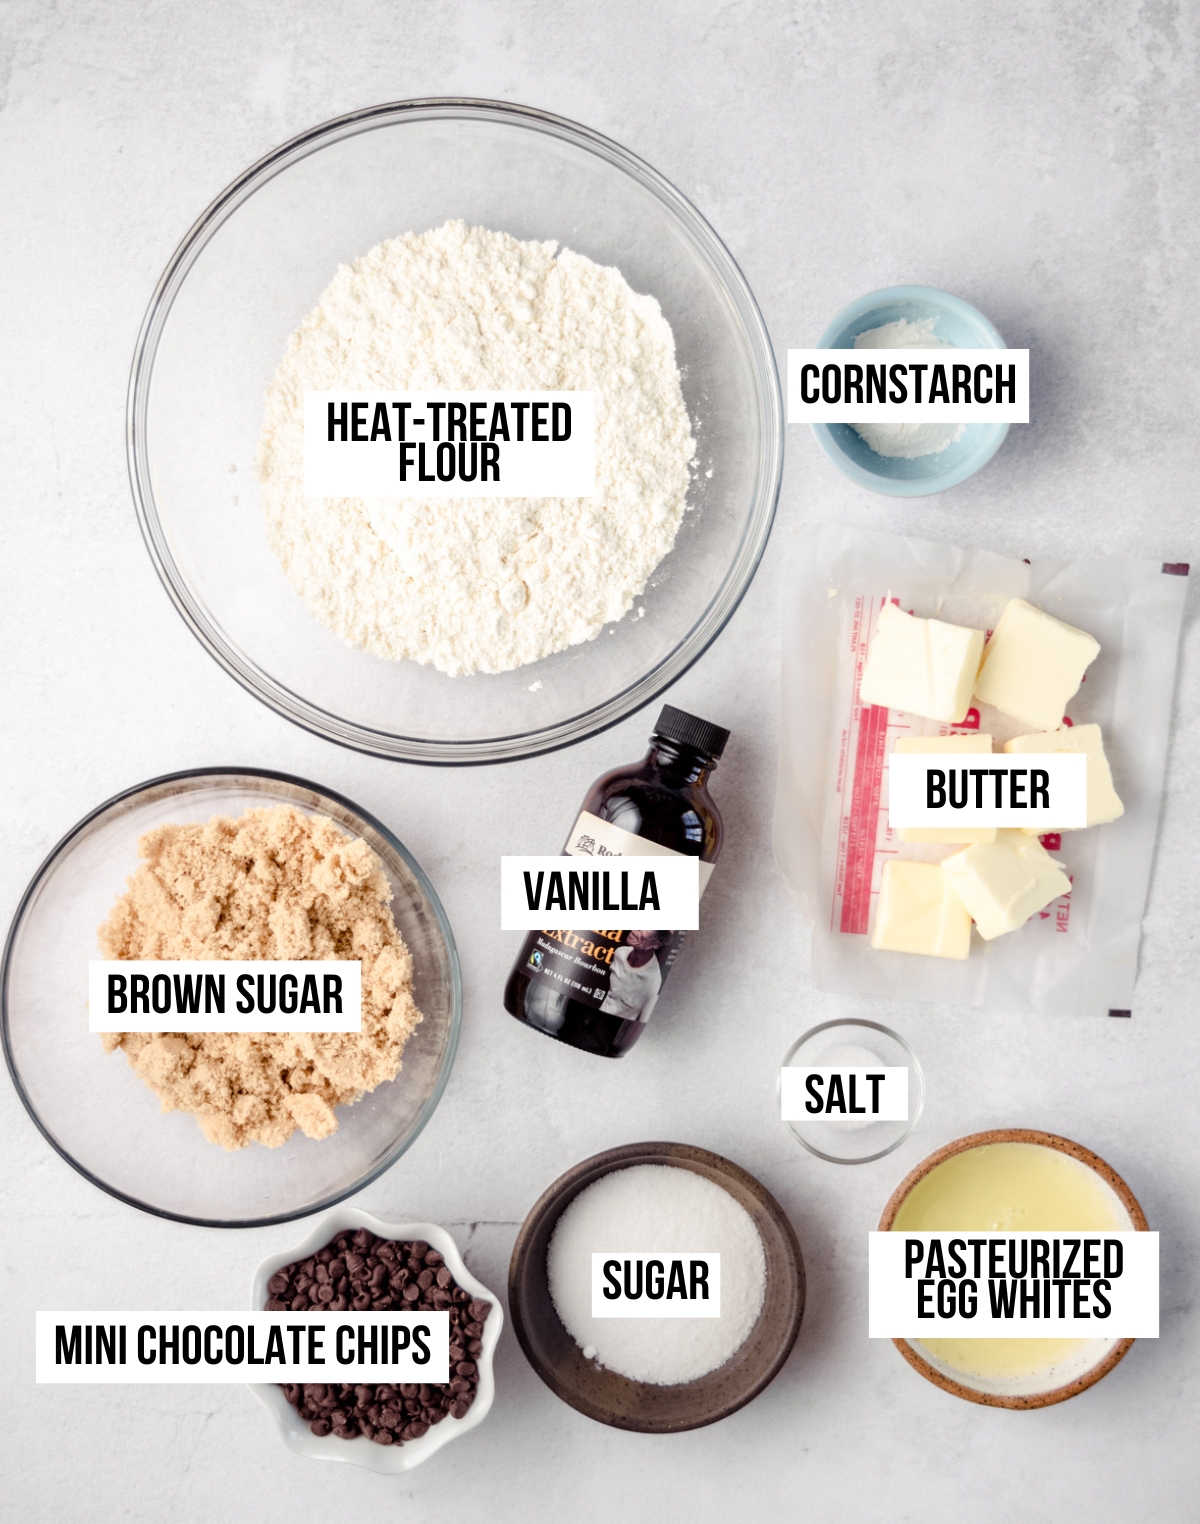 Aerial photo of ingredients for edible cookie dough with text overlay.